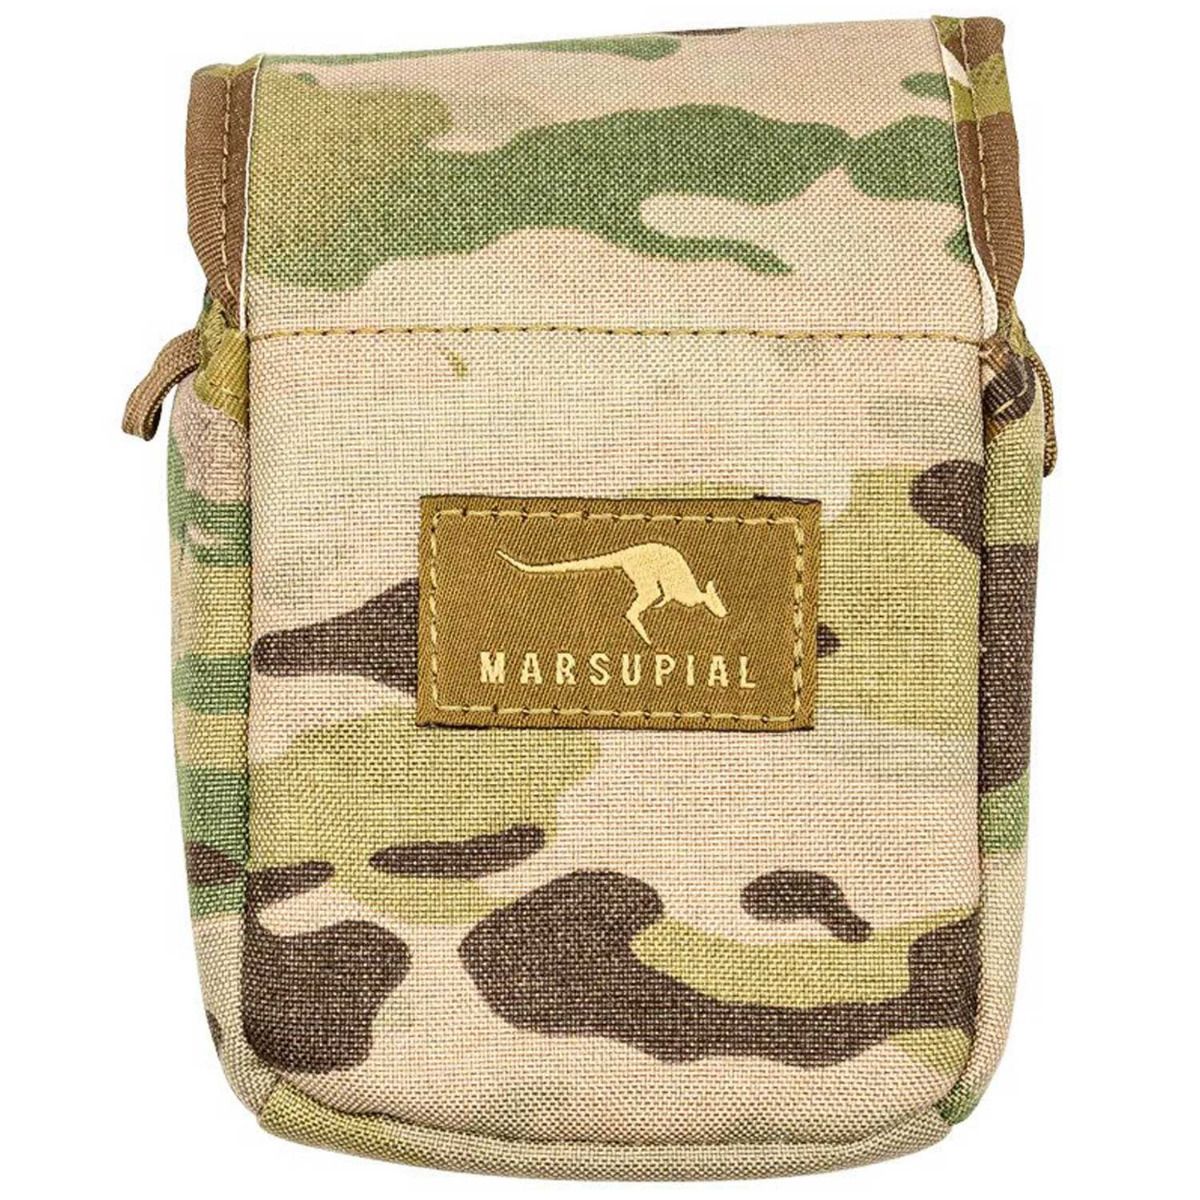 Marsupial Gear - Small Zippered Pouch Large / Wolf and Coyote